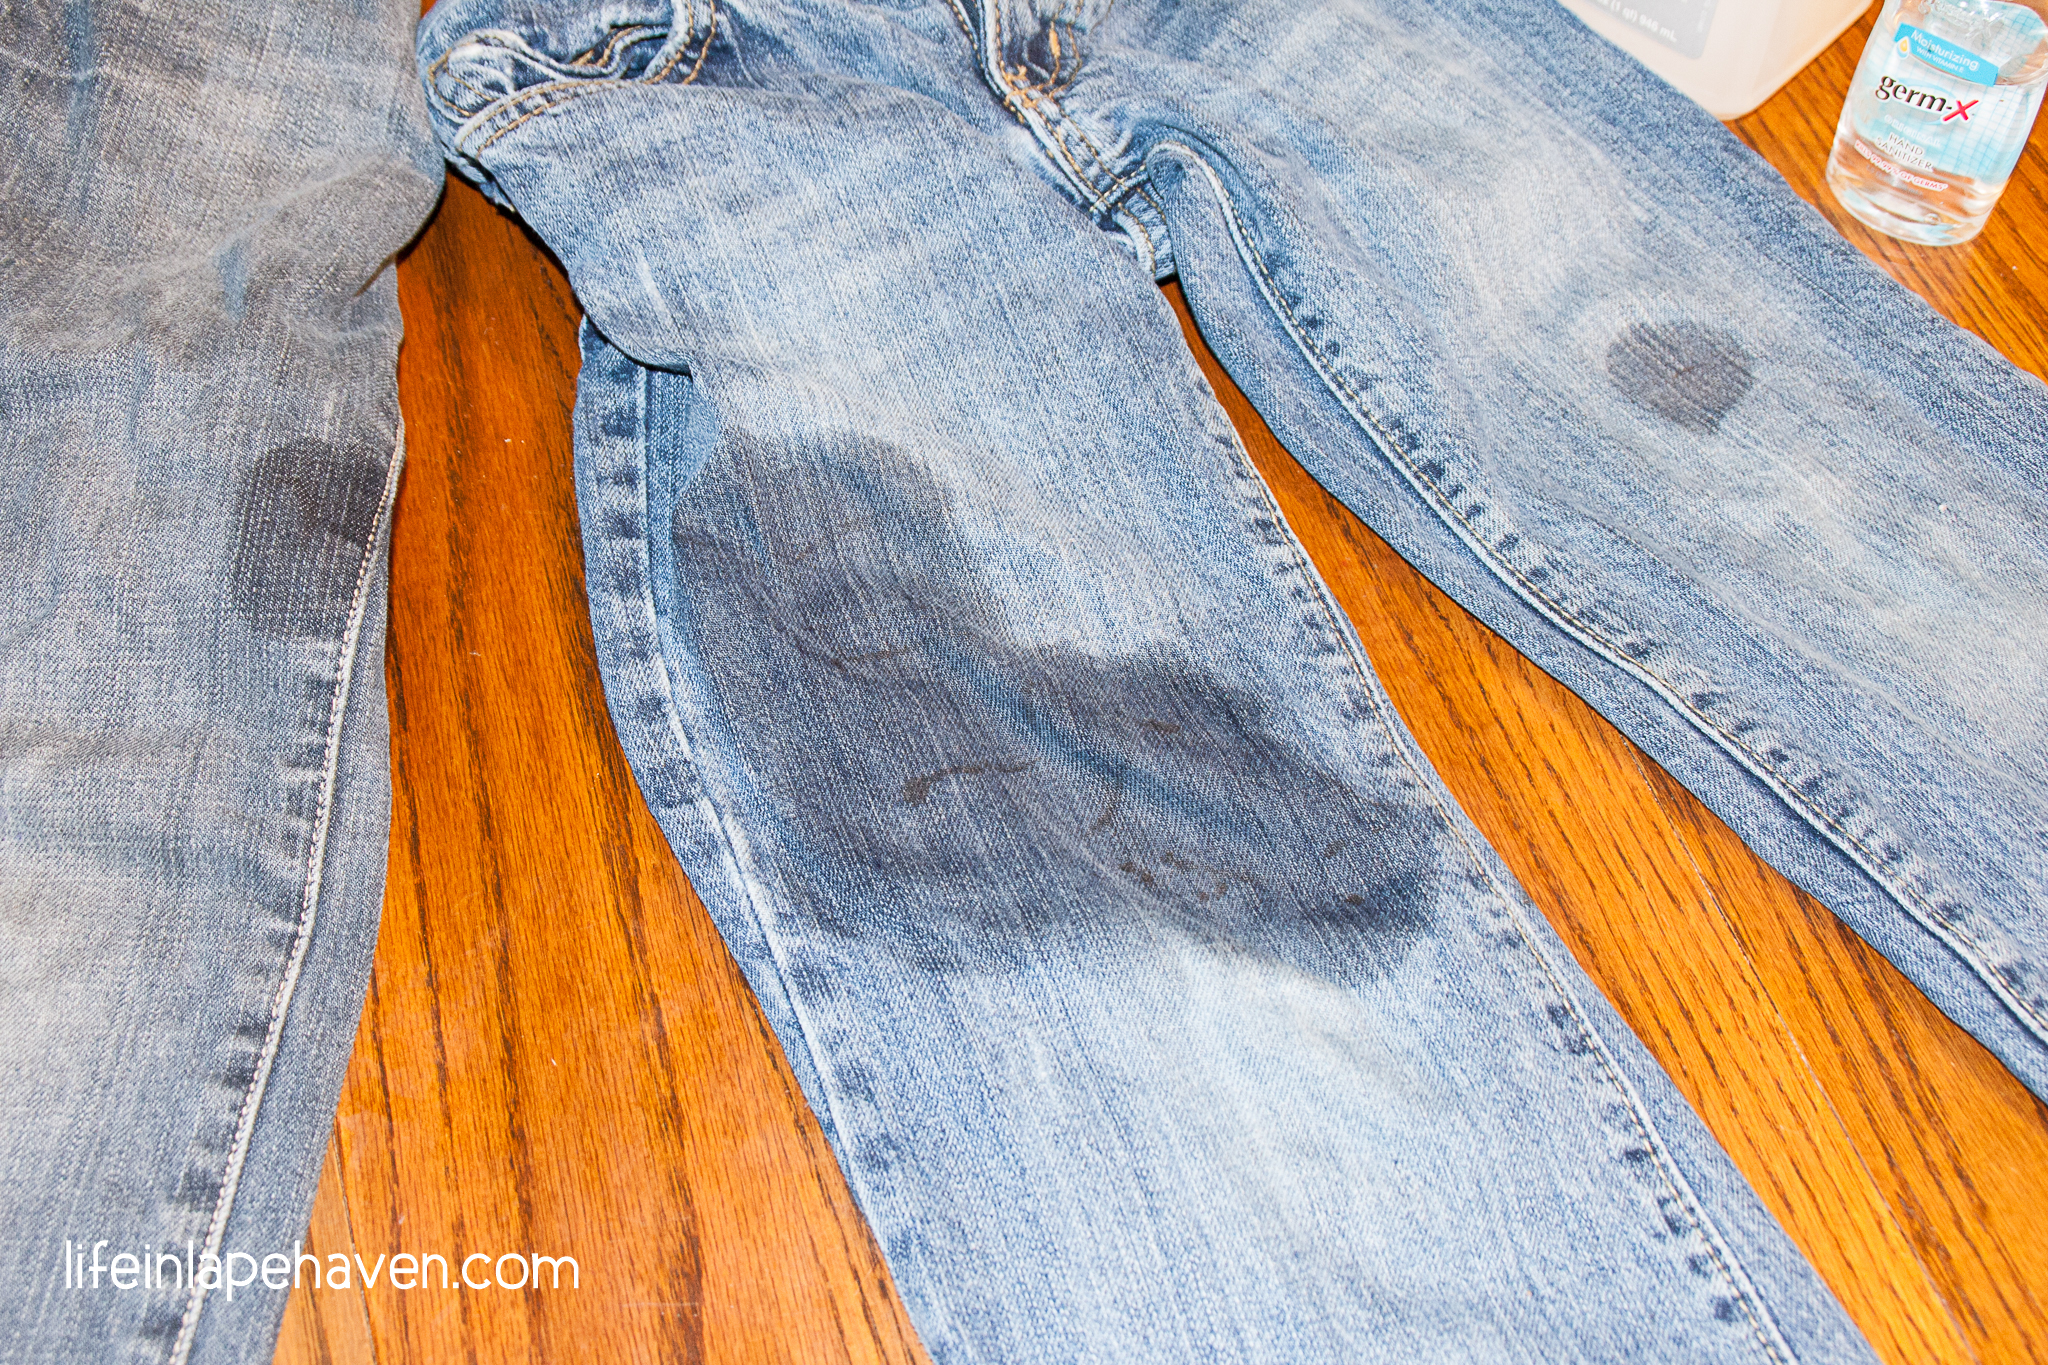 7 Ways to Remove a Stain from a Pair of Jeans - wikiHow